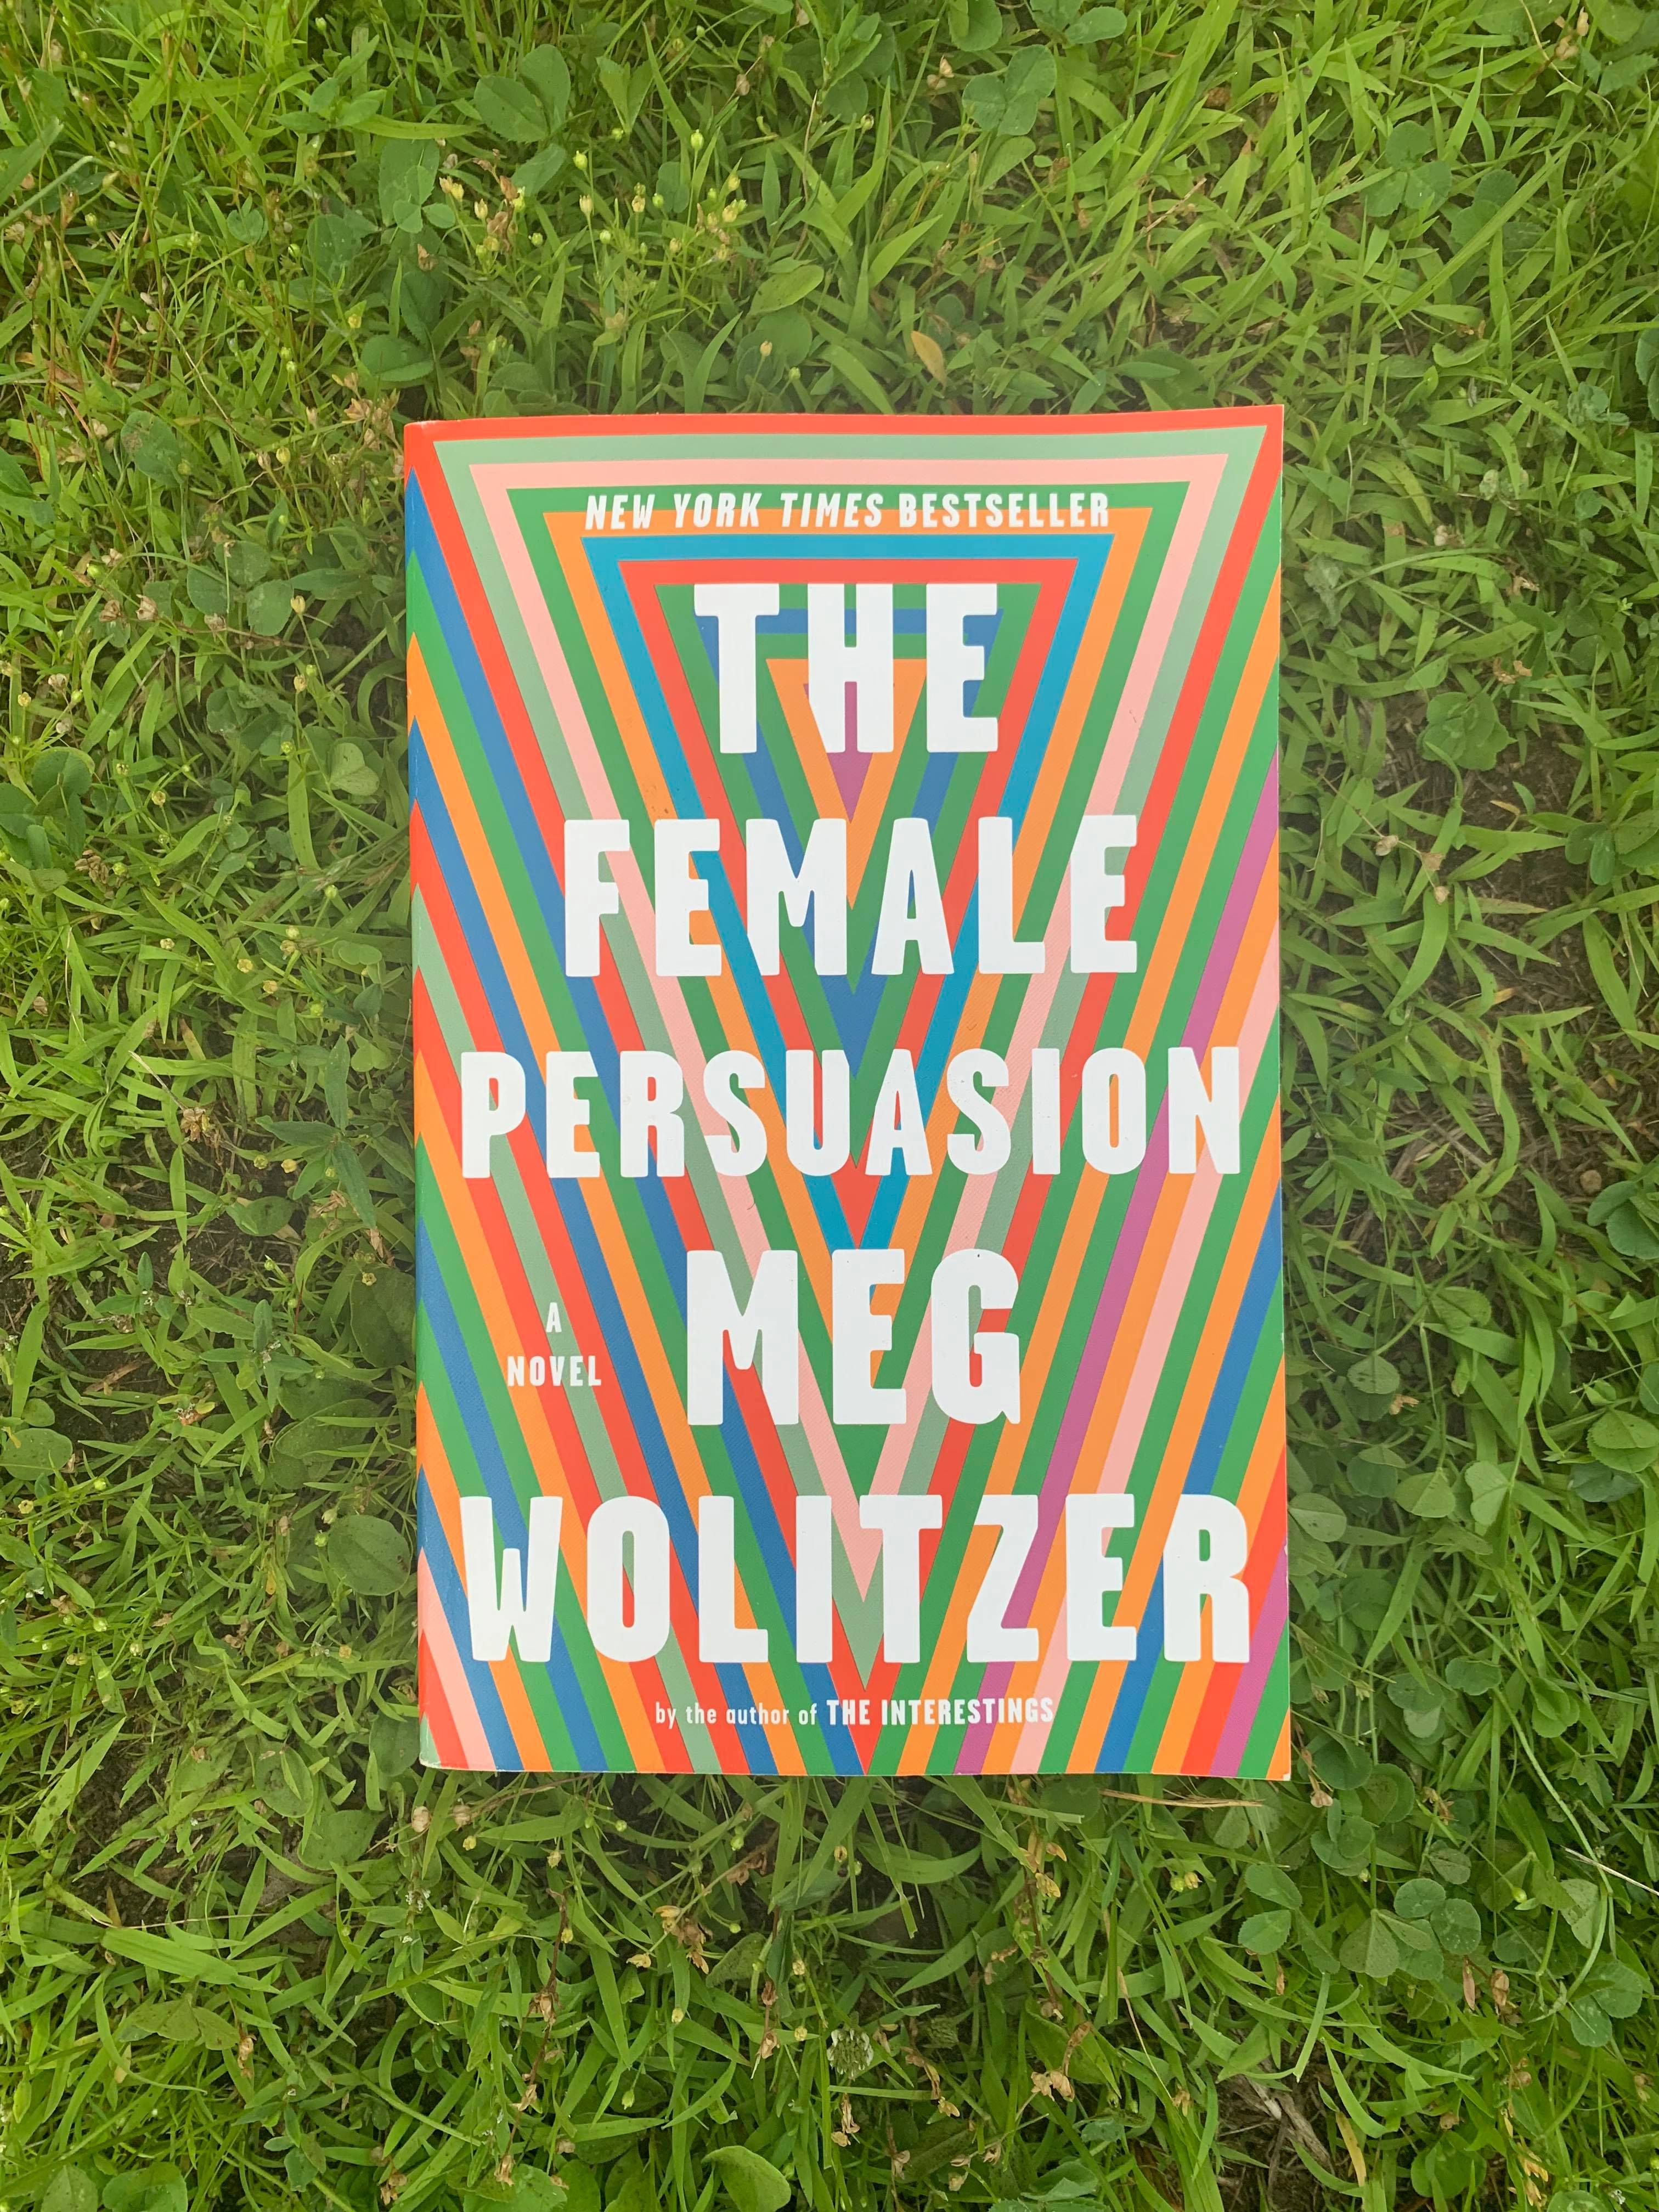 What We’re Reading: Meg Wolitzer’s ‘The Female Persuasion’